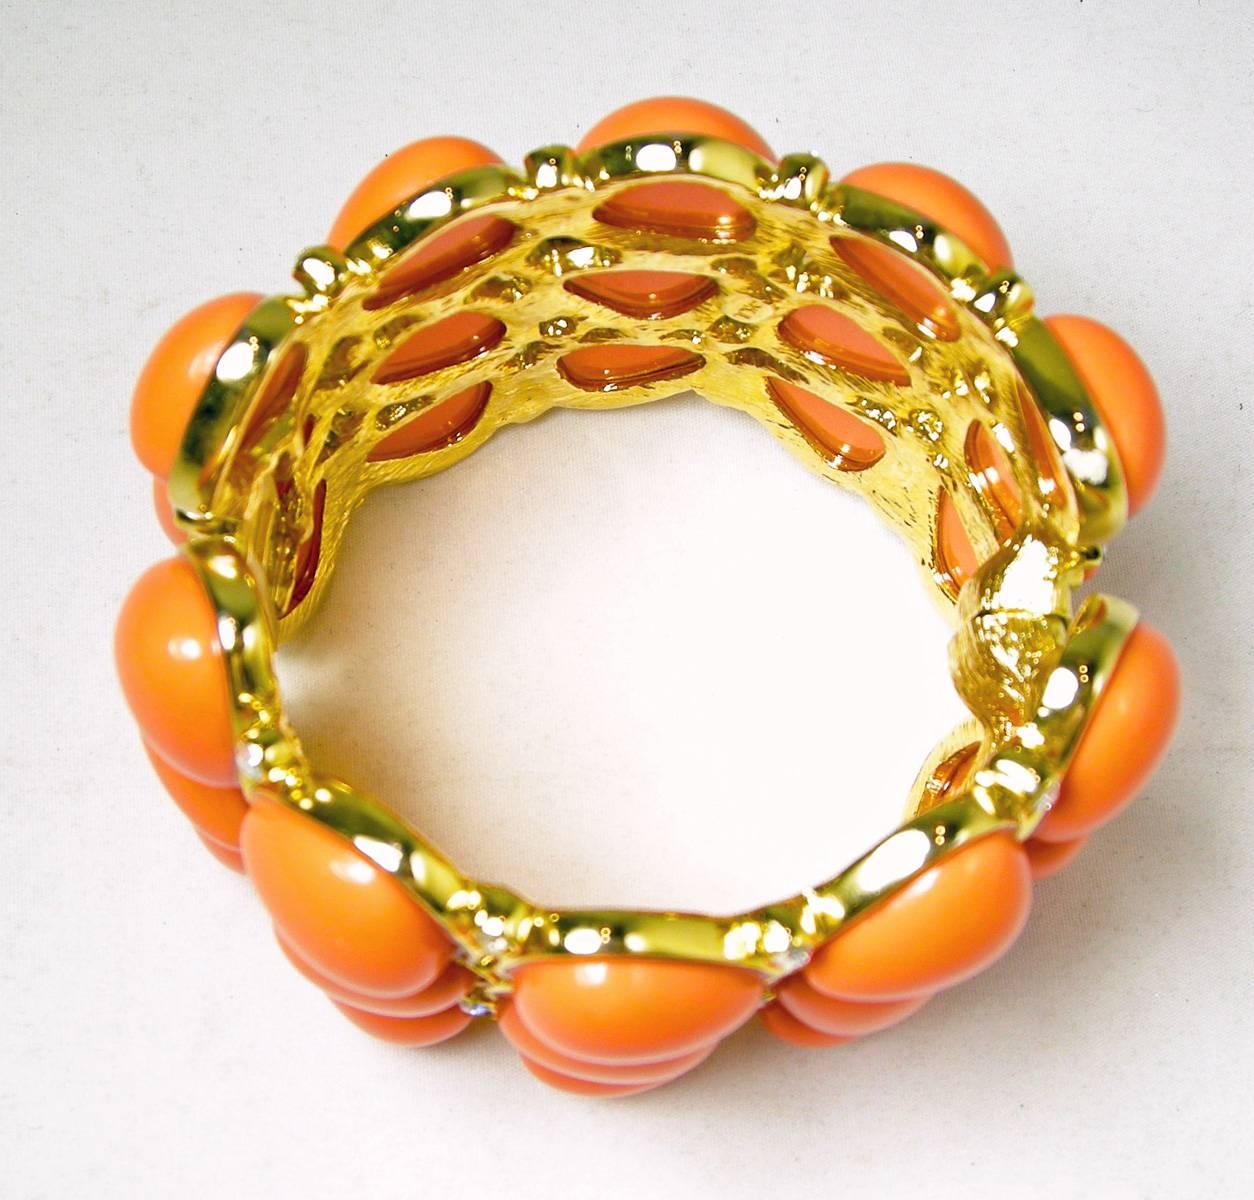 This is a magnetic clamper bracelet made by Kenneth Jay Lane. It is made with segmented chunky faux coral color cabochon stones set in a bright gold tone setting. It measures 7” x 2” and is signed “KJL”.  It is in excellent condition.